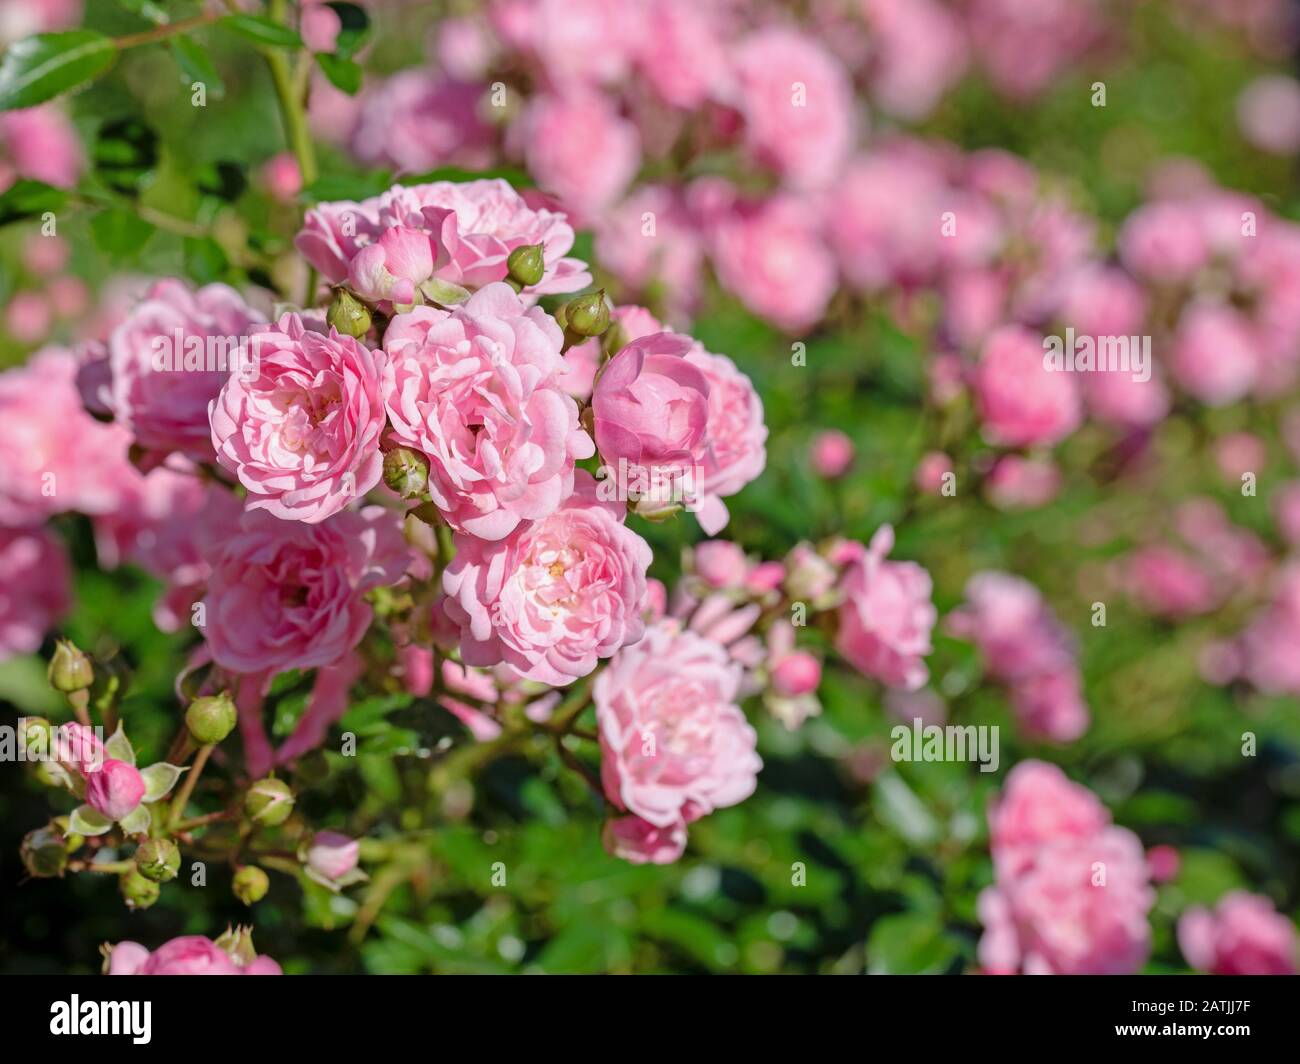 Buschrosen High Resolution Stock Photography and Images - Alamy